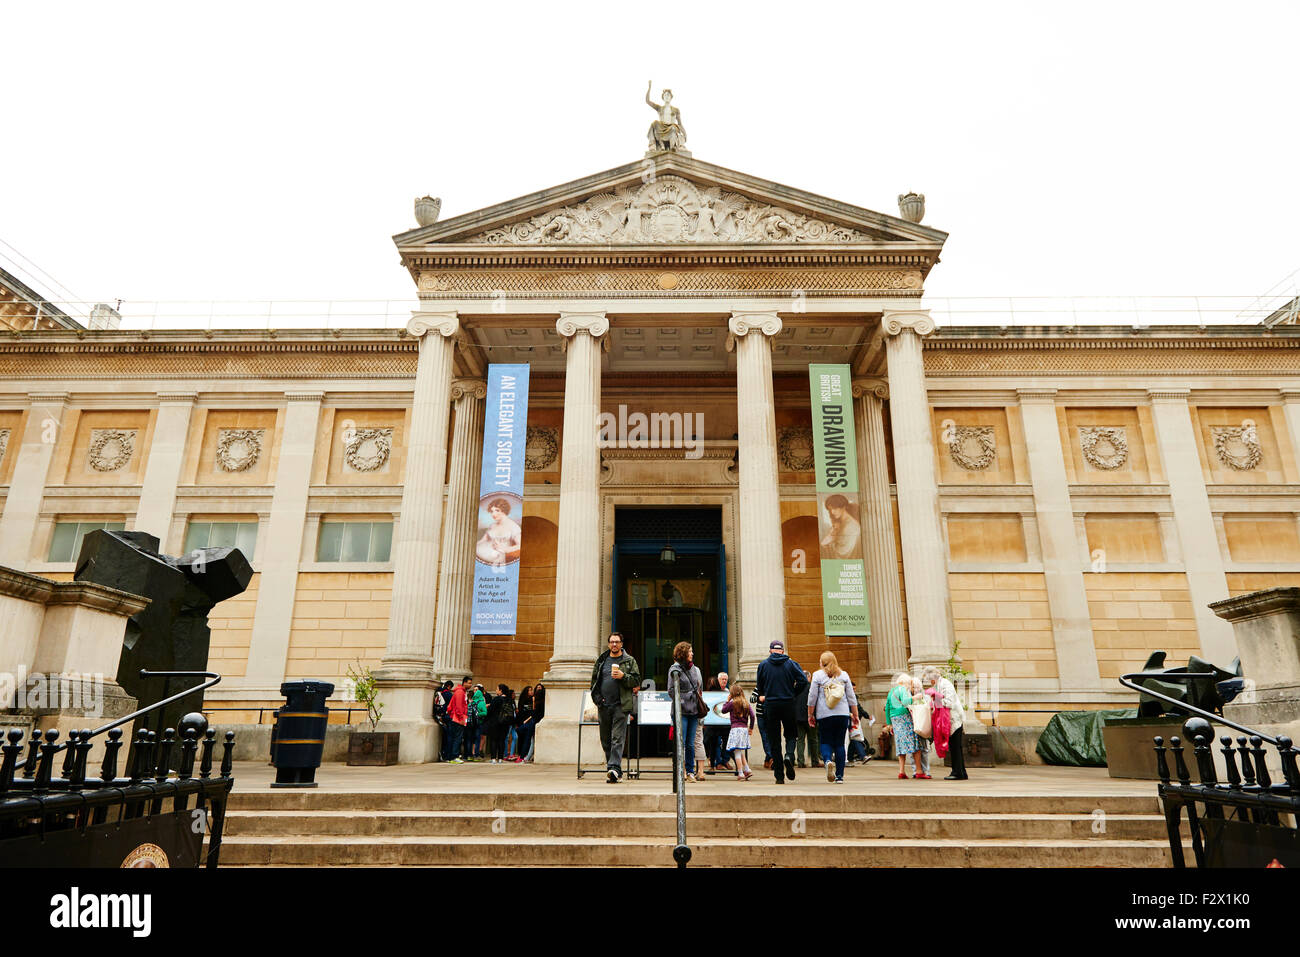 Ashmolean Museum, Oxford, Oxfordshire, Angleterre, Europe Banque D'Images